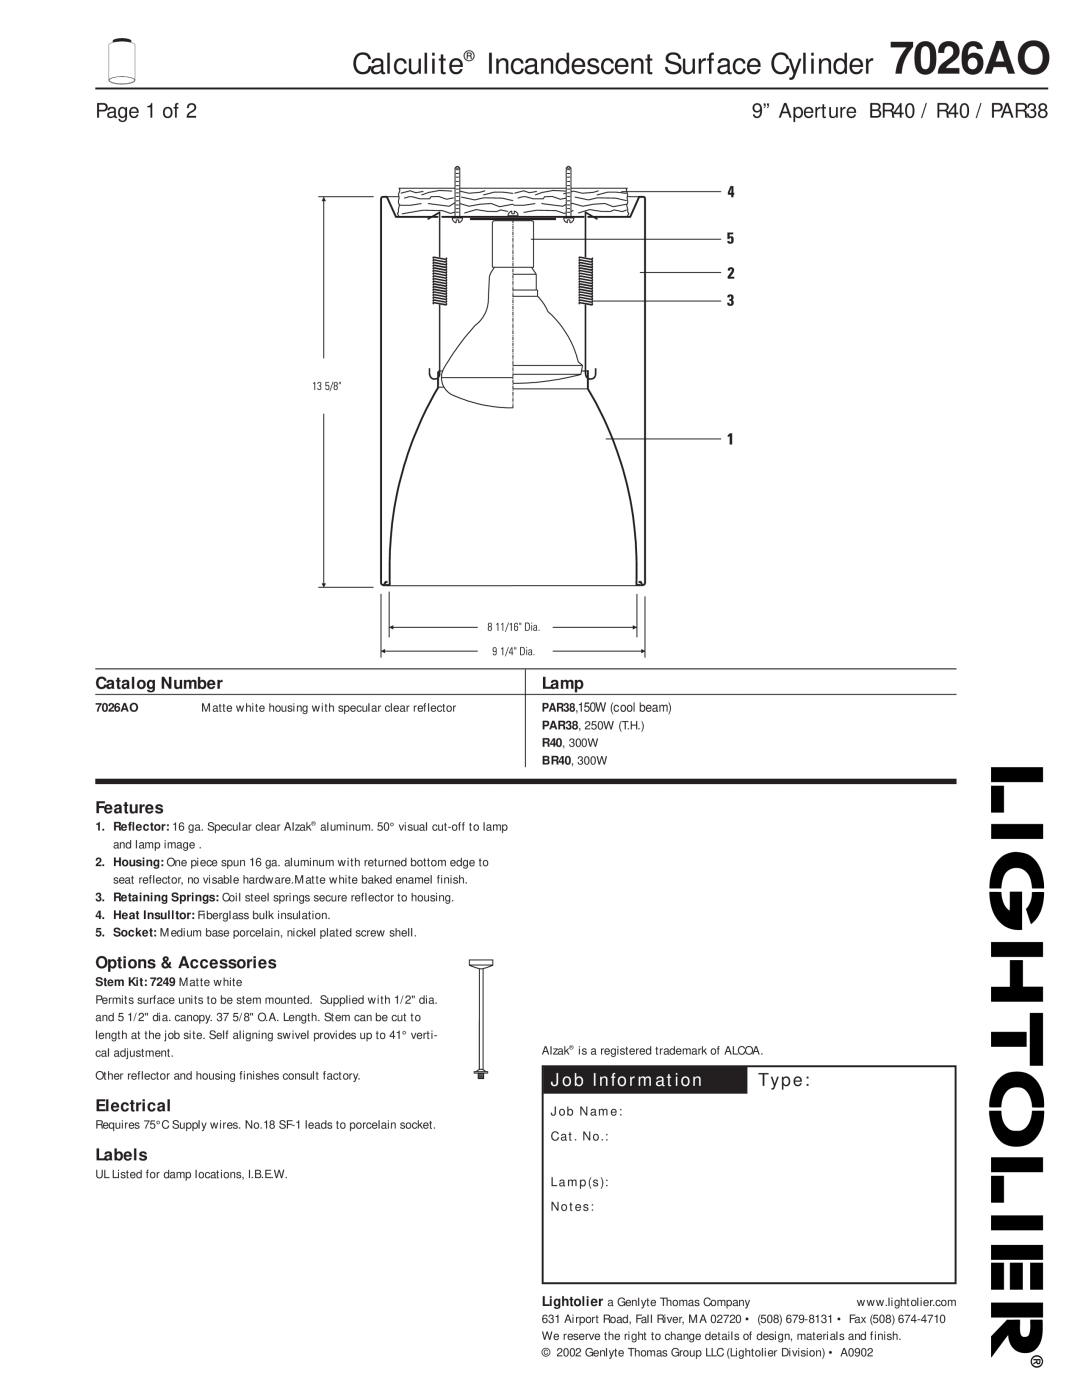 Lightolier manual Calculite Incandescent Surface Cylinder 7026AO, Job Information, Type, Page 1 of, Catalog Number 